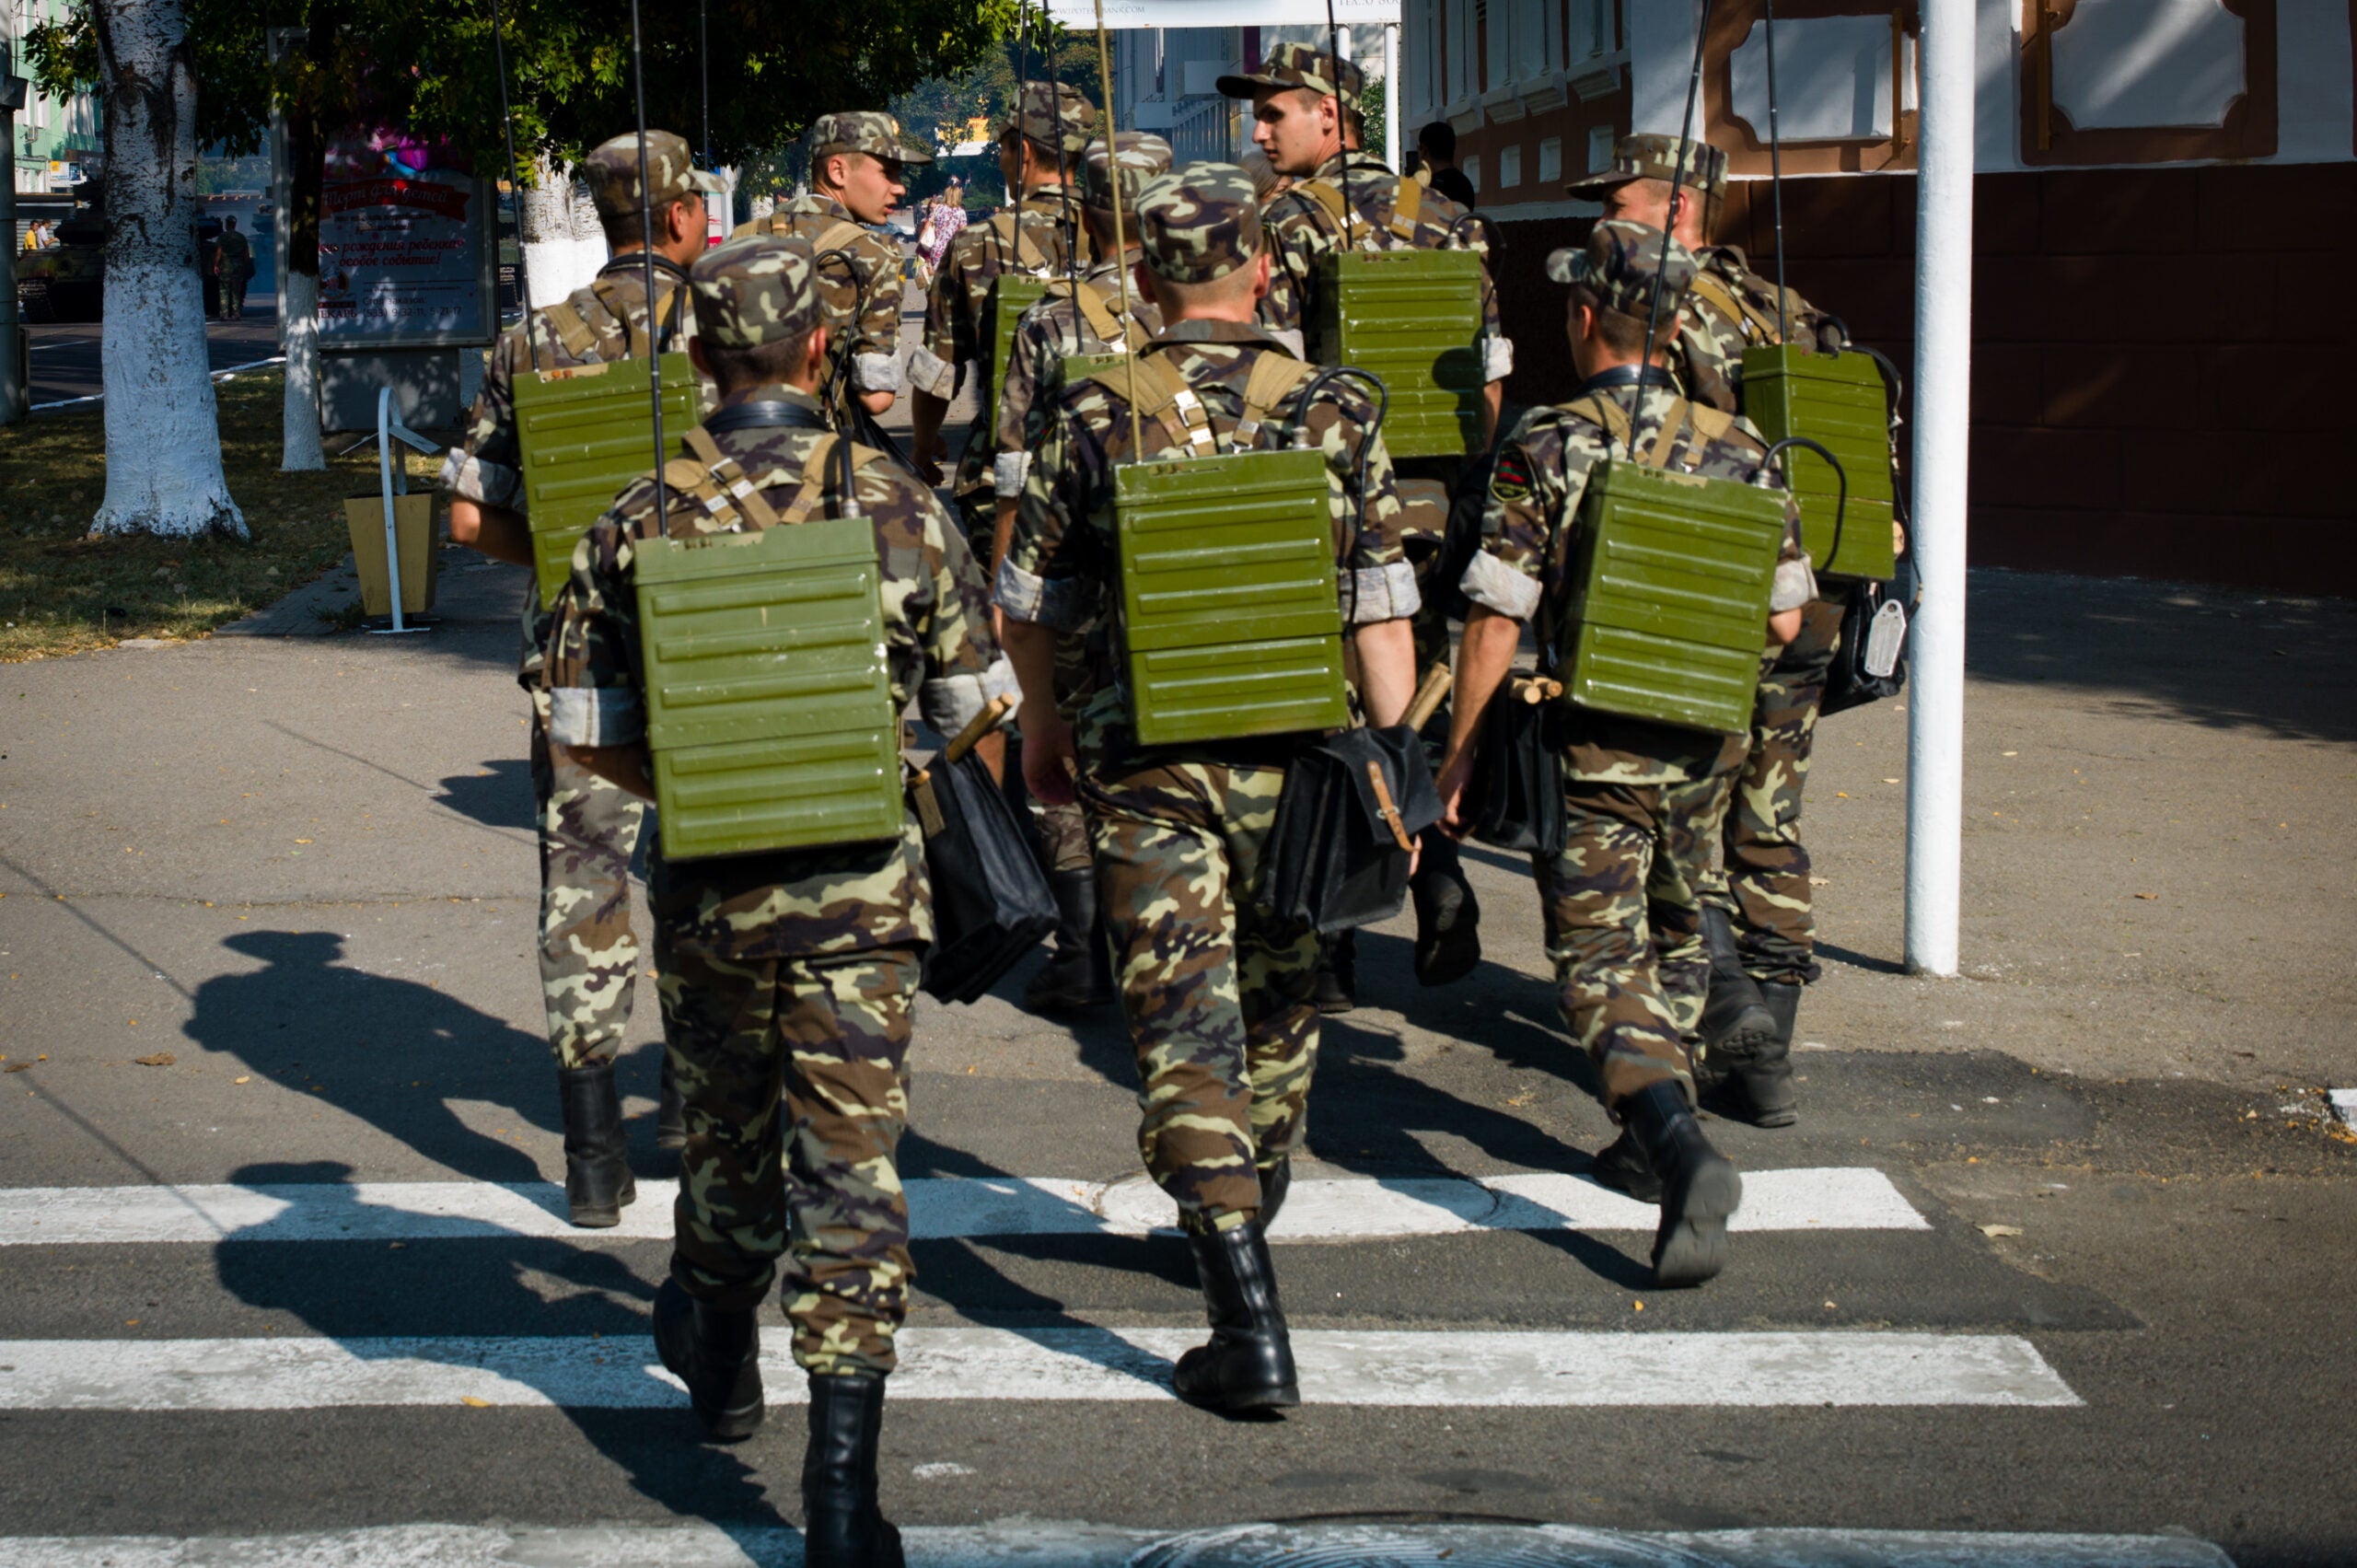 201508231 Moldova, Transnistria,Pridnestrovian Moldavian Republic (PMR) Tiraspol.Soldiers cross the street with communication material on their backs. They exercise for the official 25th anniversary of their unrecognized country, on september 2. (Photo by Sander de Wilde/Corbis via Getty Images)